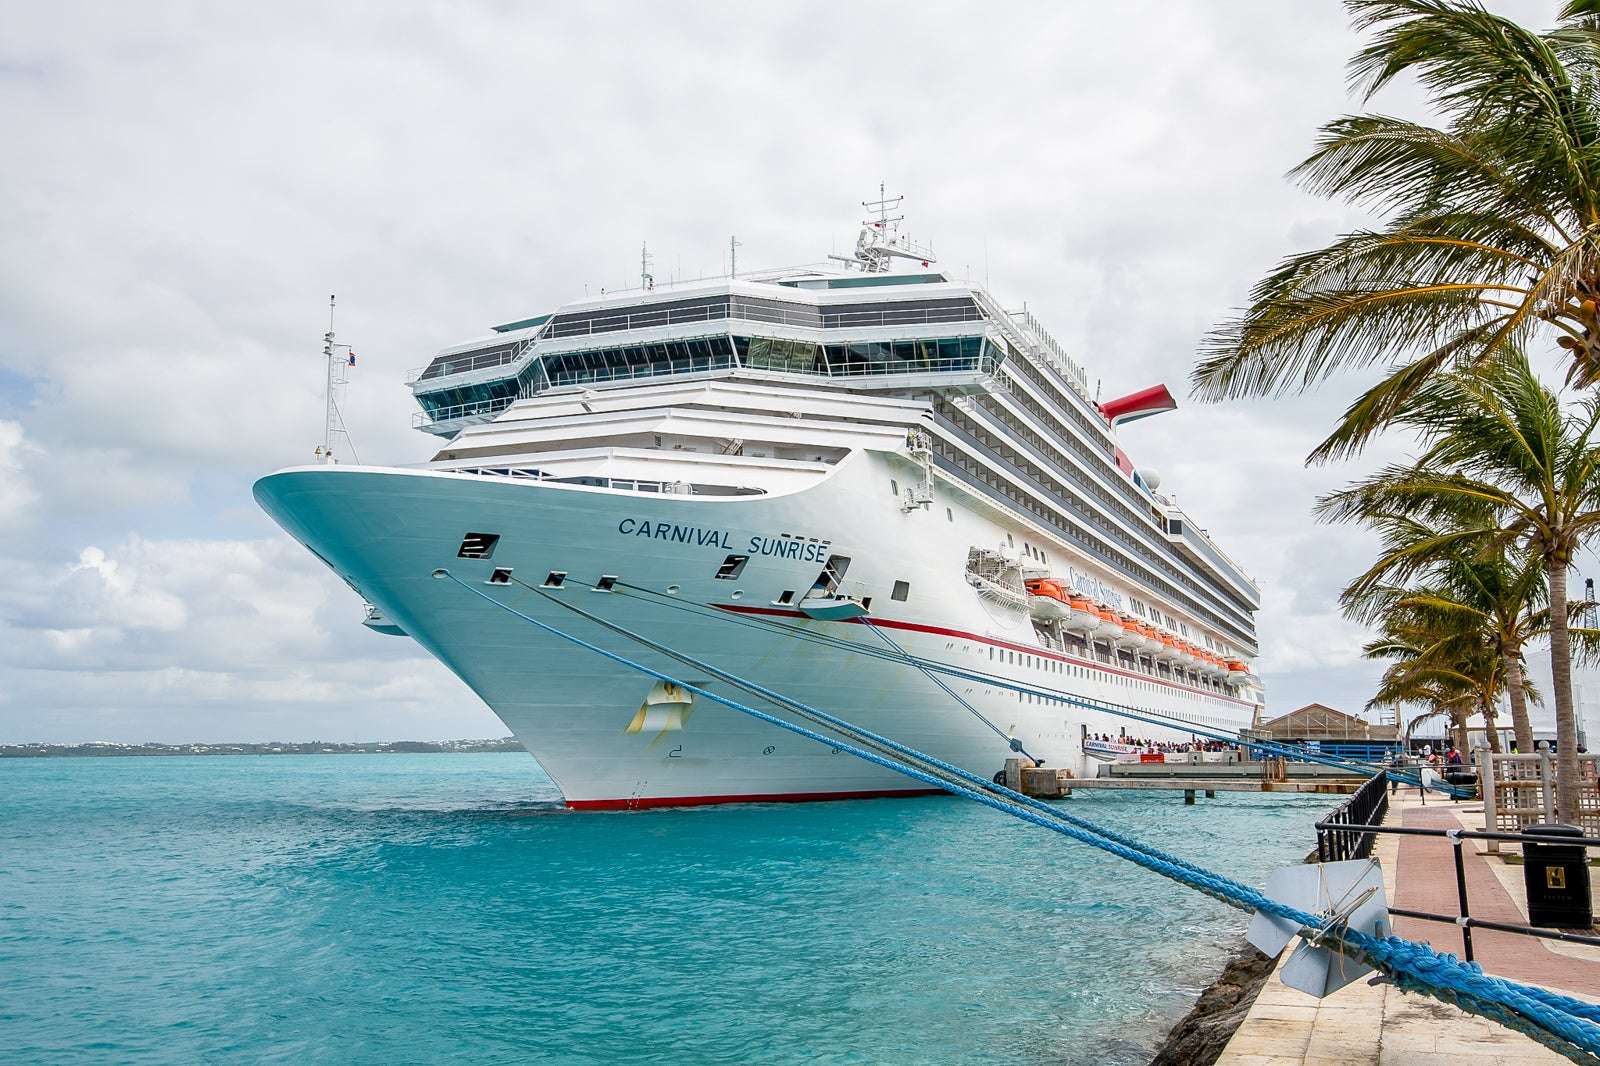 First Look at Carnival Cruise Lineâs